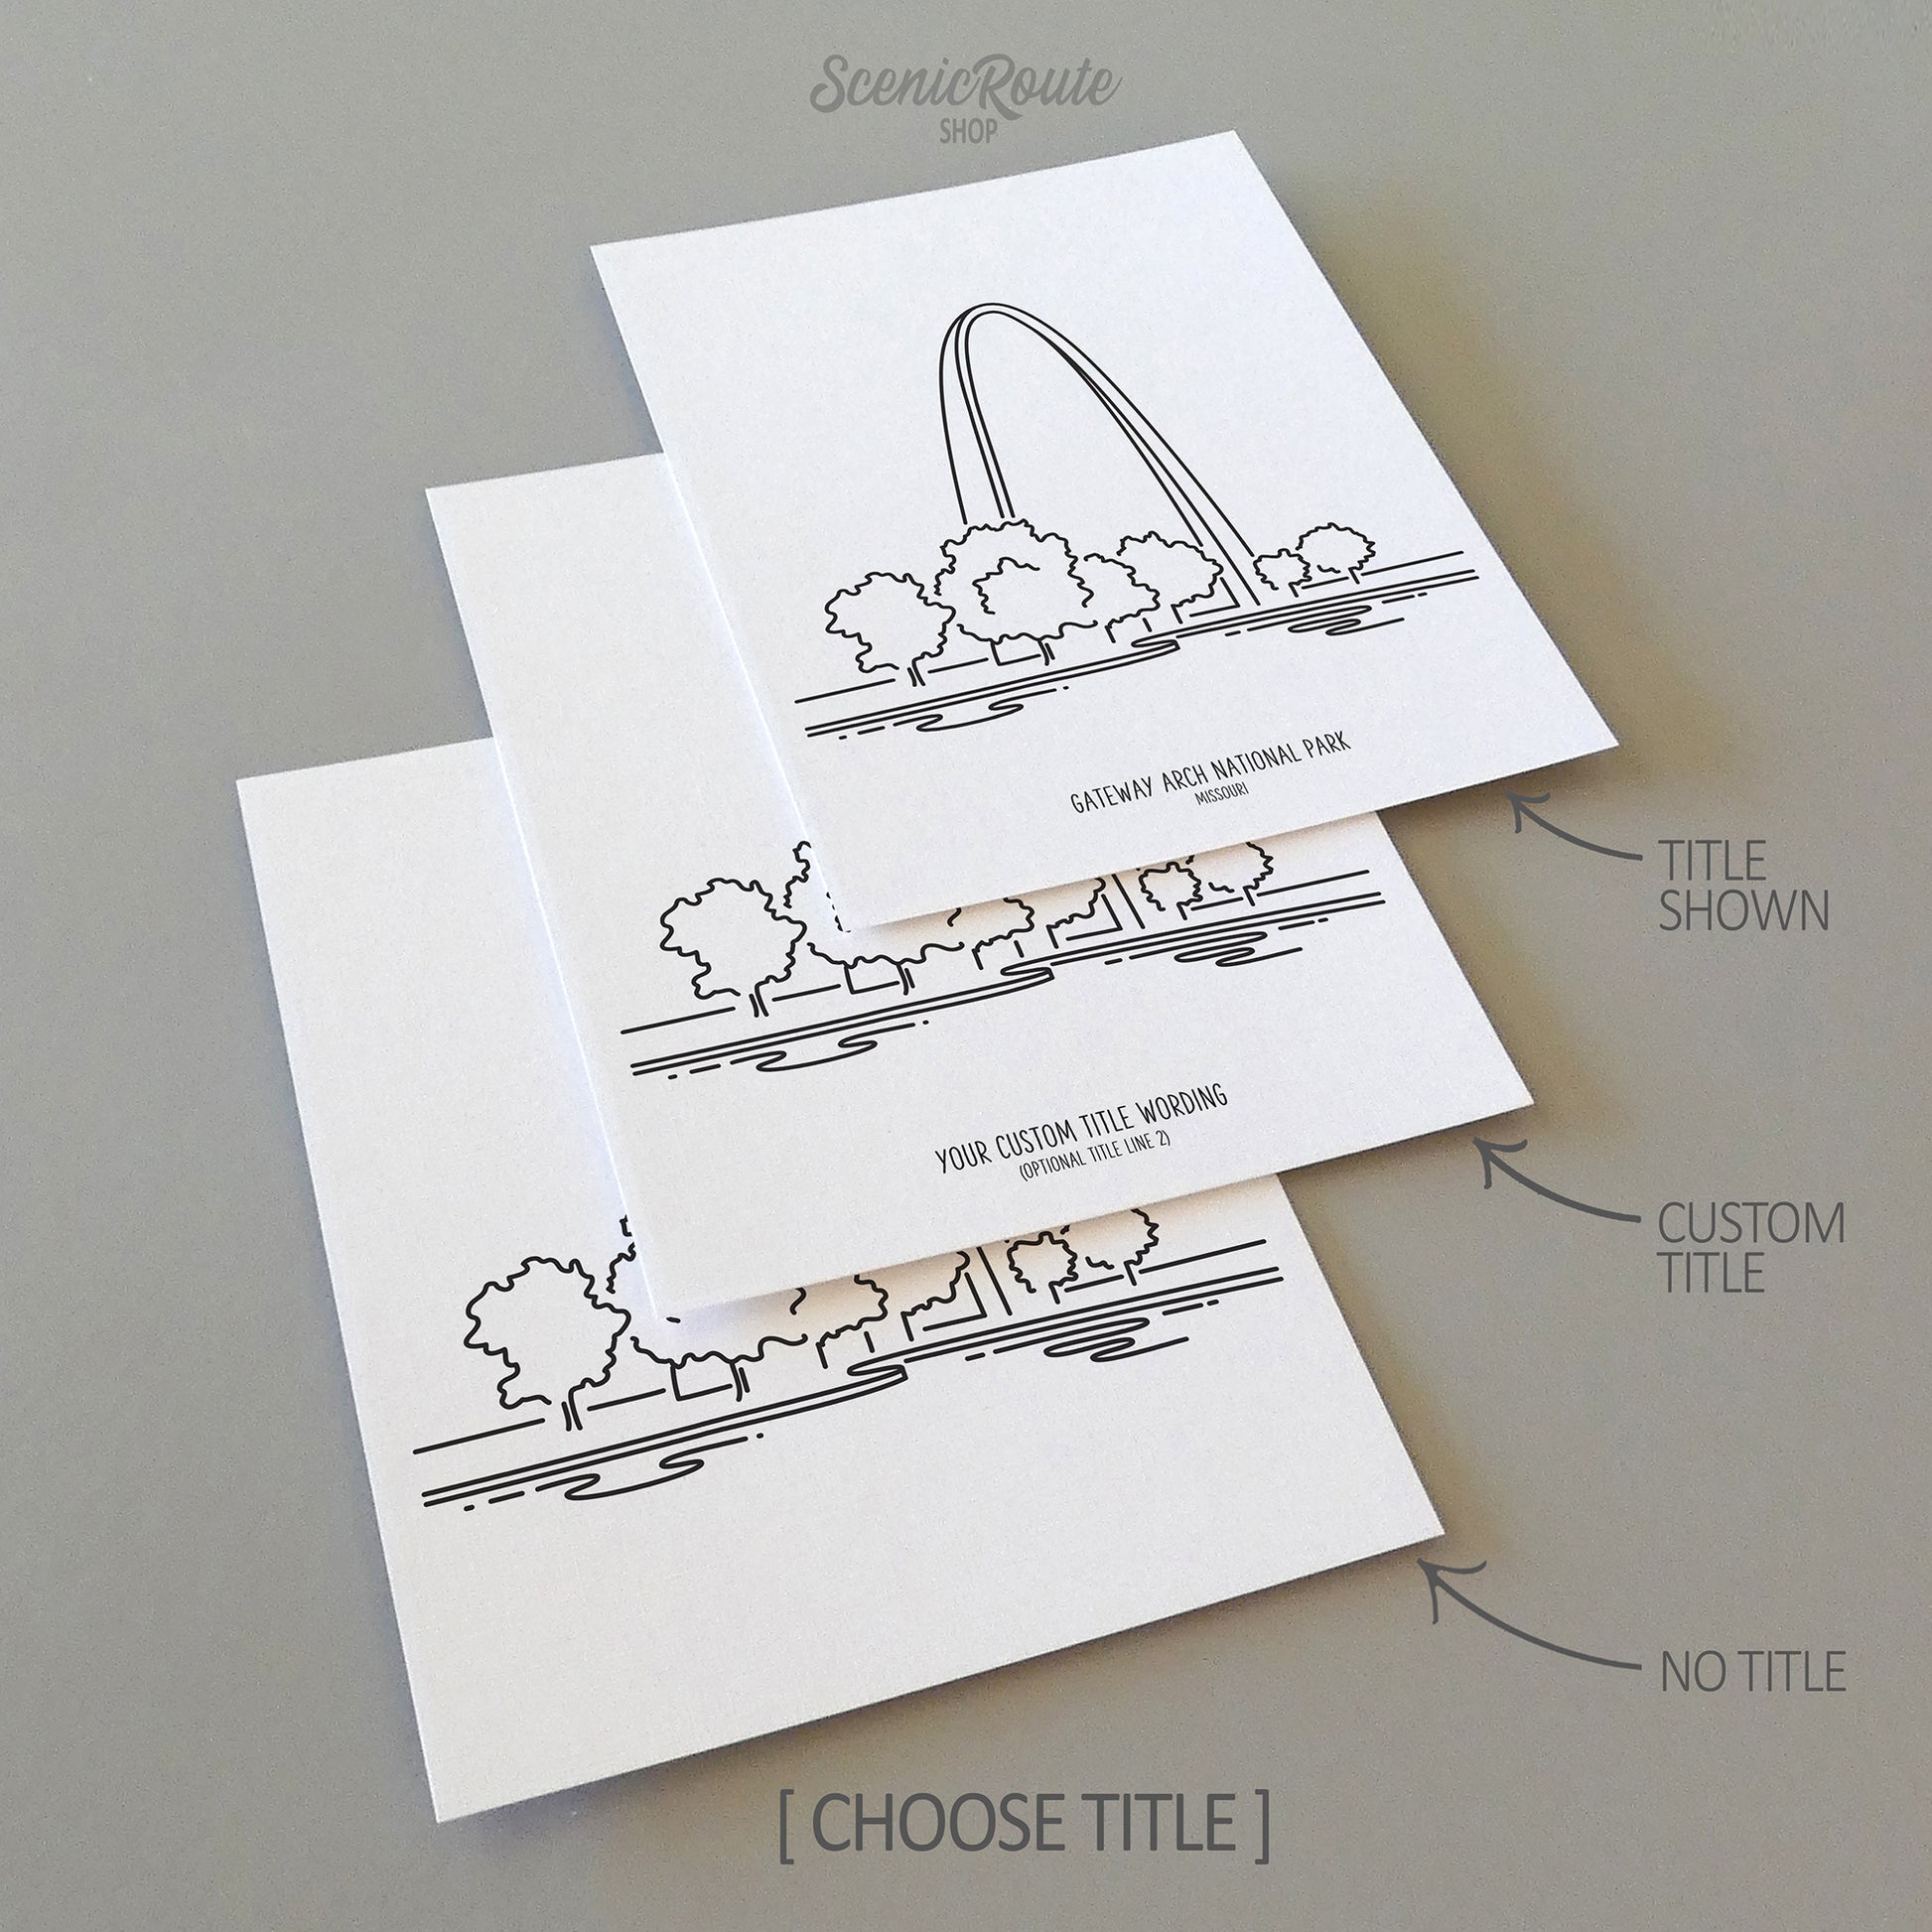 Three line art drawings of Gateway Arch National Park on white linen paper with a gray background. The pieces are shown with title options that can be chosen and personalized.